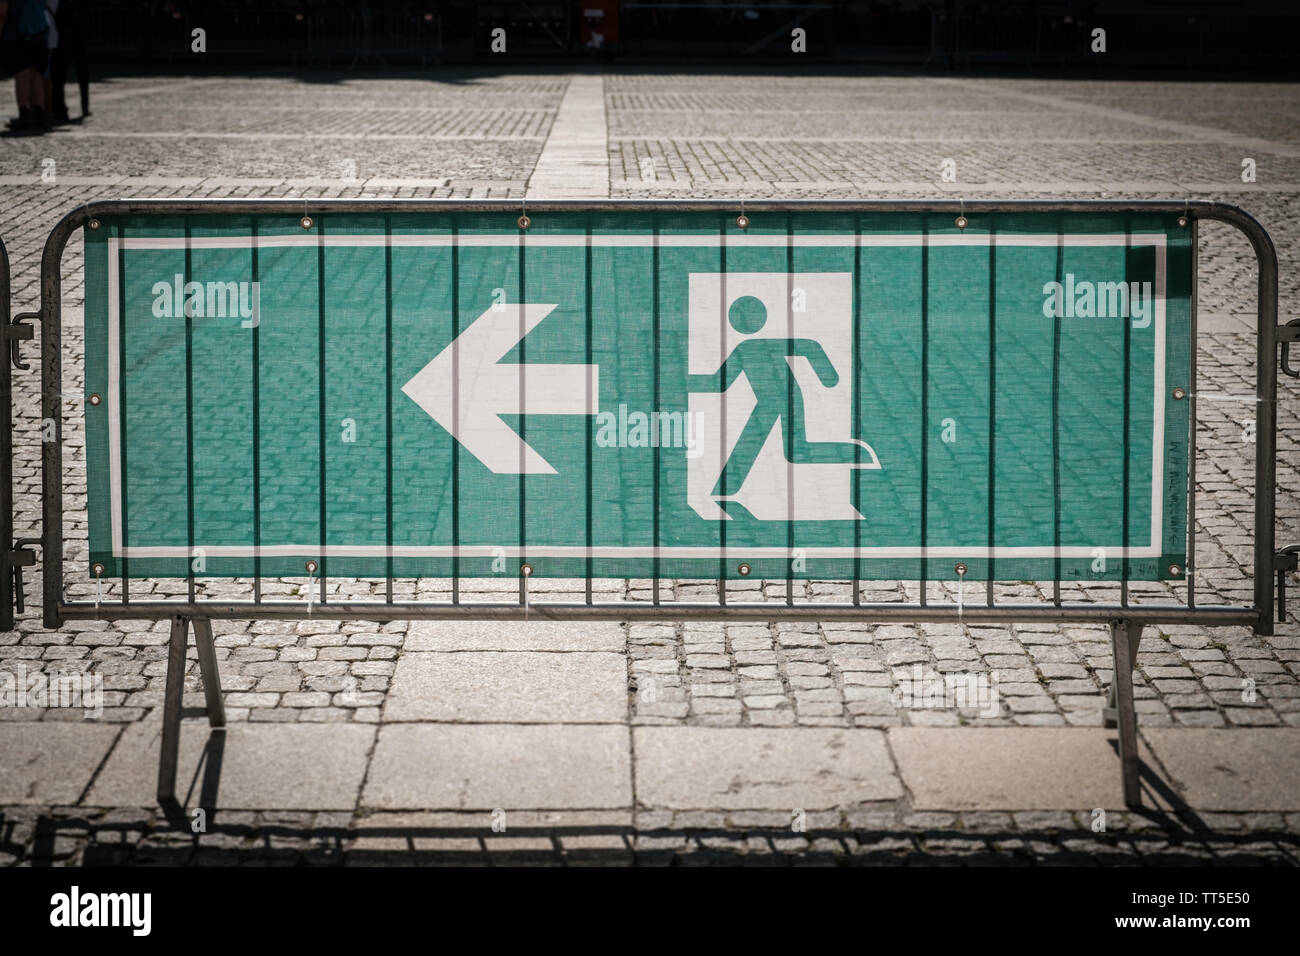 emergency exit sign on security fence for outdoor event Stock Photo